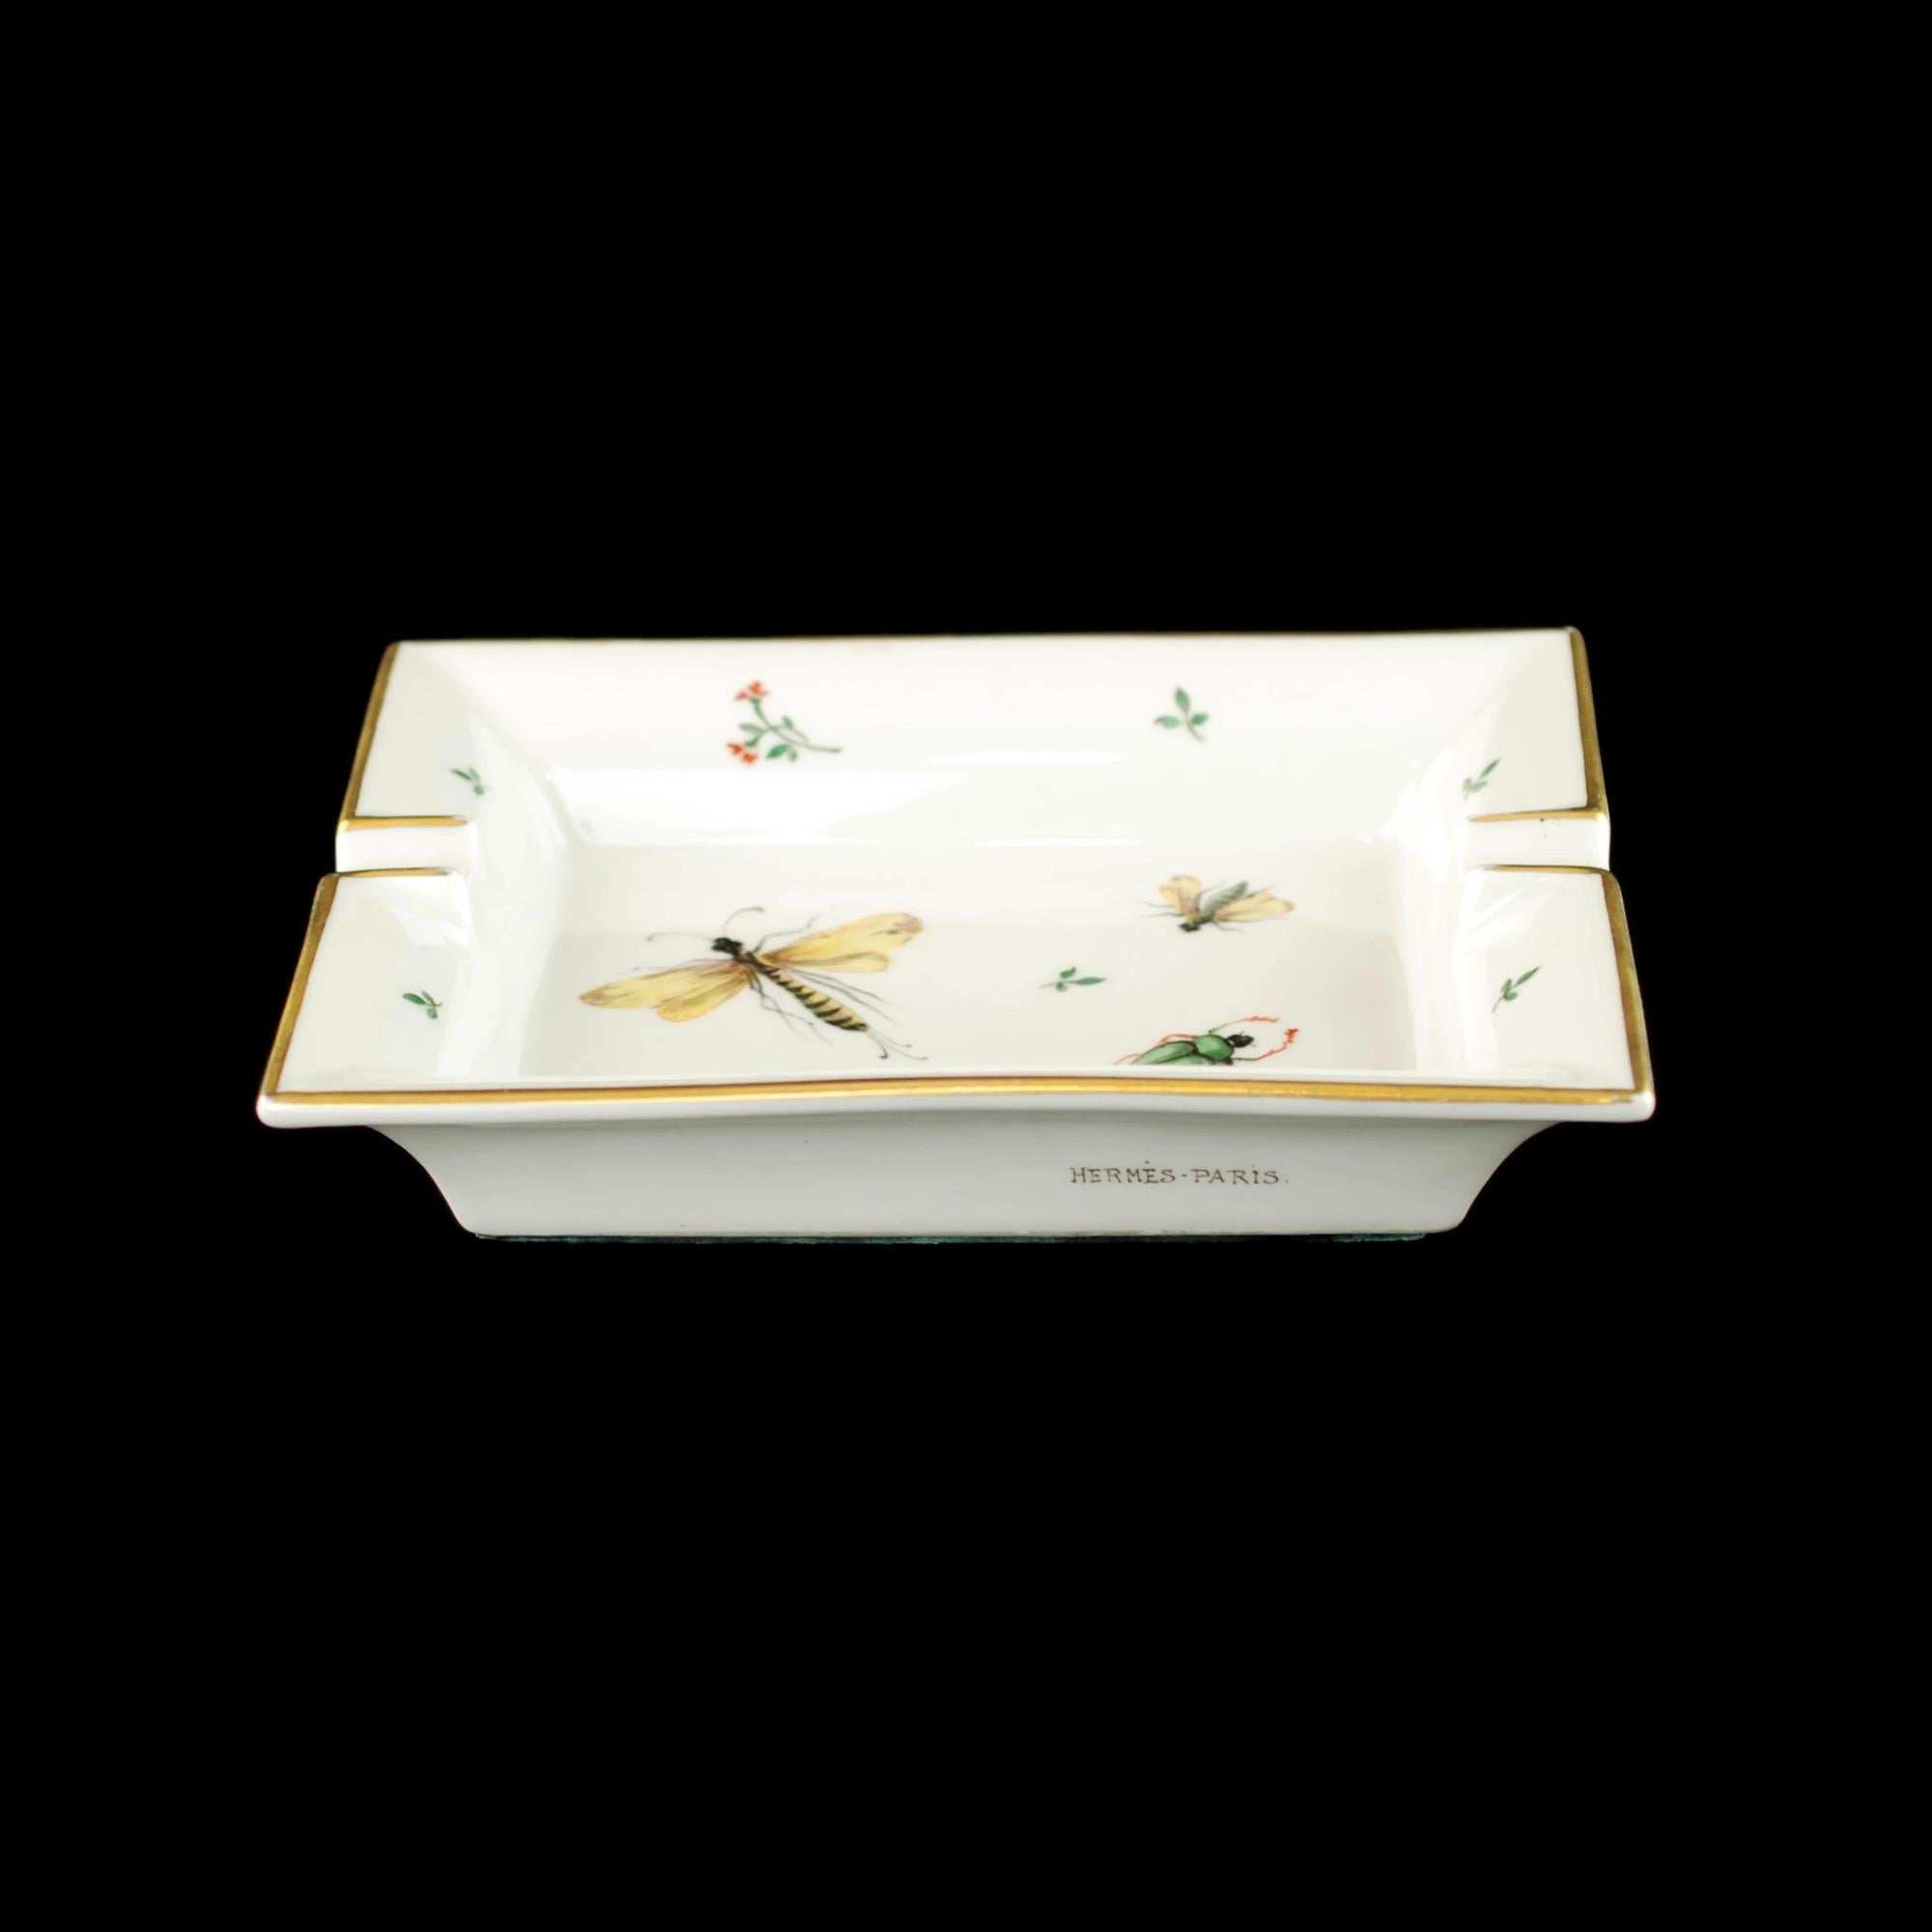 This vintage porcelain 2 rest ashtray was made for renowned French luxury goods purveyor Hermès. The iconic institution has been a fixture of the Parisian fashion scene since its founding in 1837. The ashtray has a rectangular shape with canted